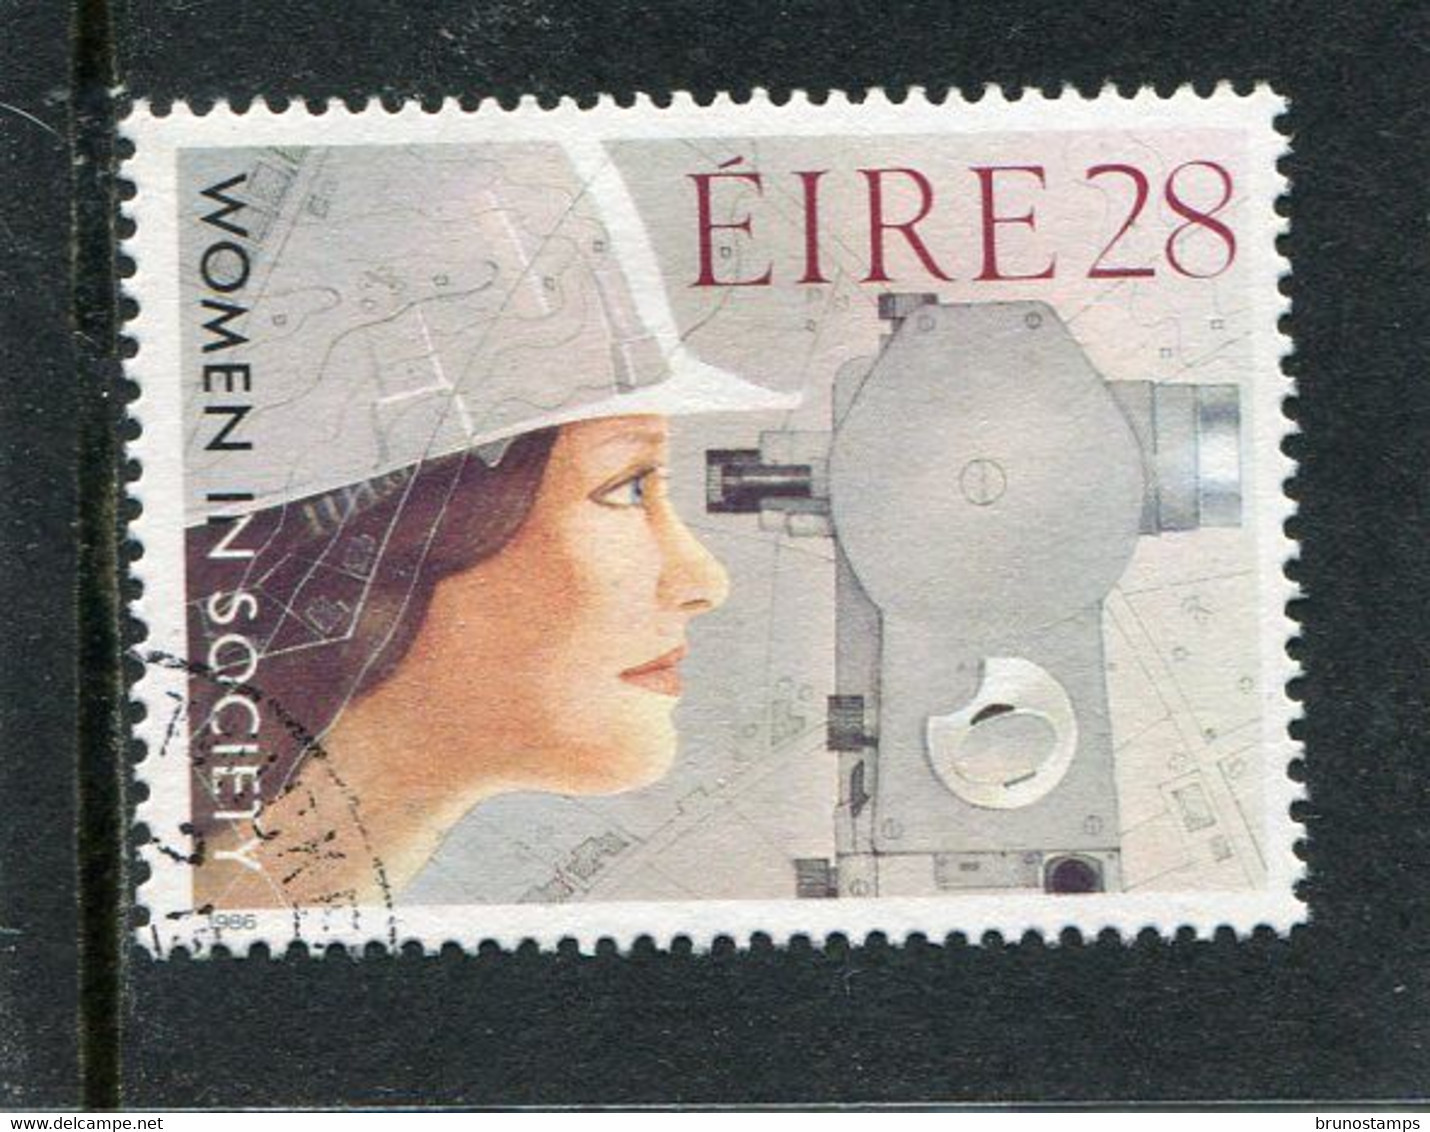 IRELAND/EIRE - 1986  28p  WOMEN IN SOCIETY  FINE USED - Usados